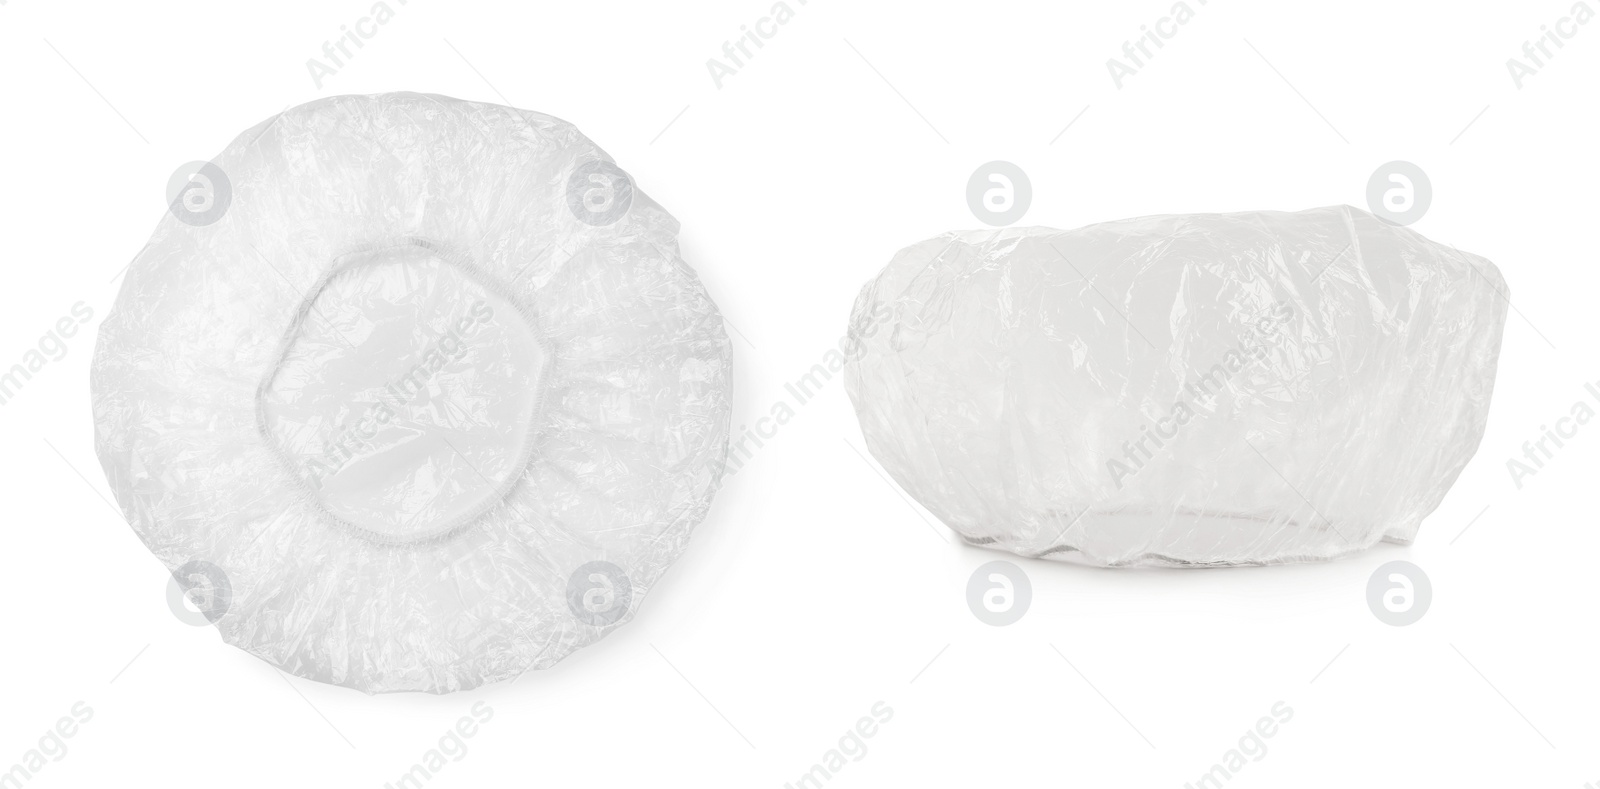 Image of Waterproof shower caps on white background, collage. Banner design